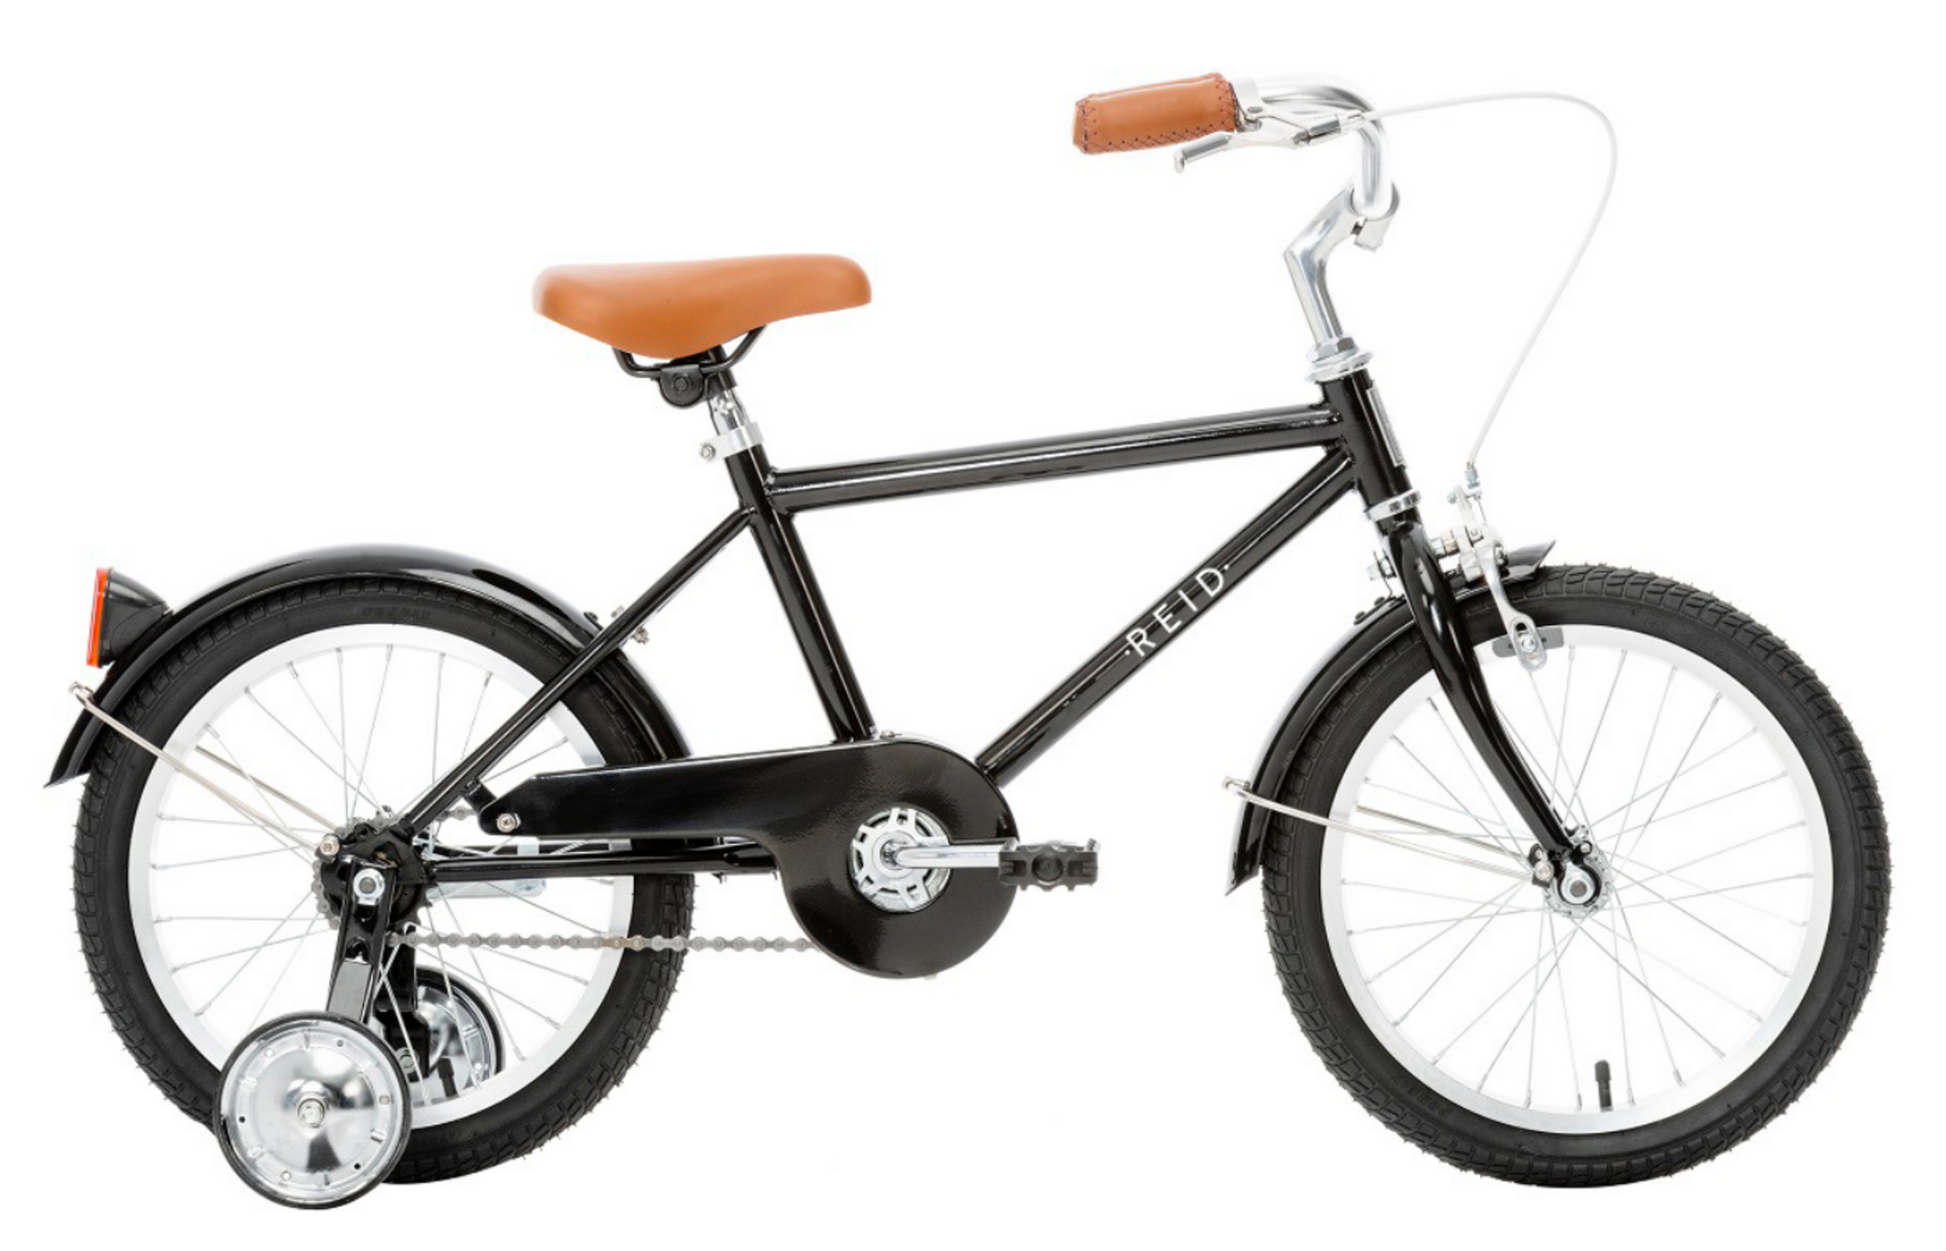 Roadster 16" Retro Style Bike in Black with training wheels from Reid Cycles Australia 